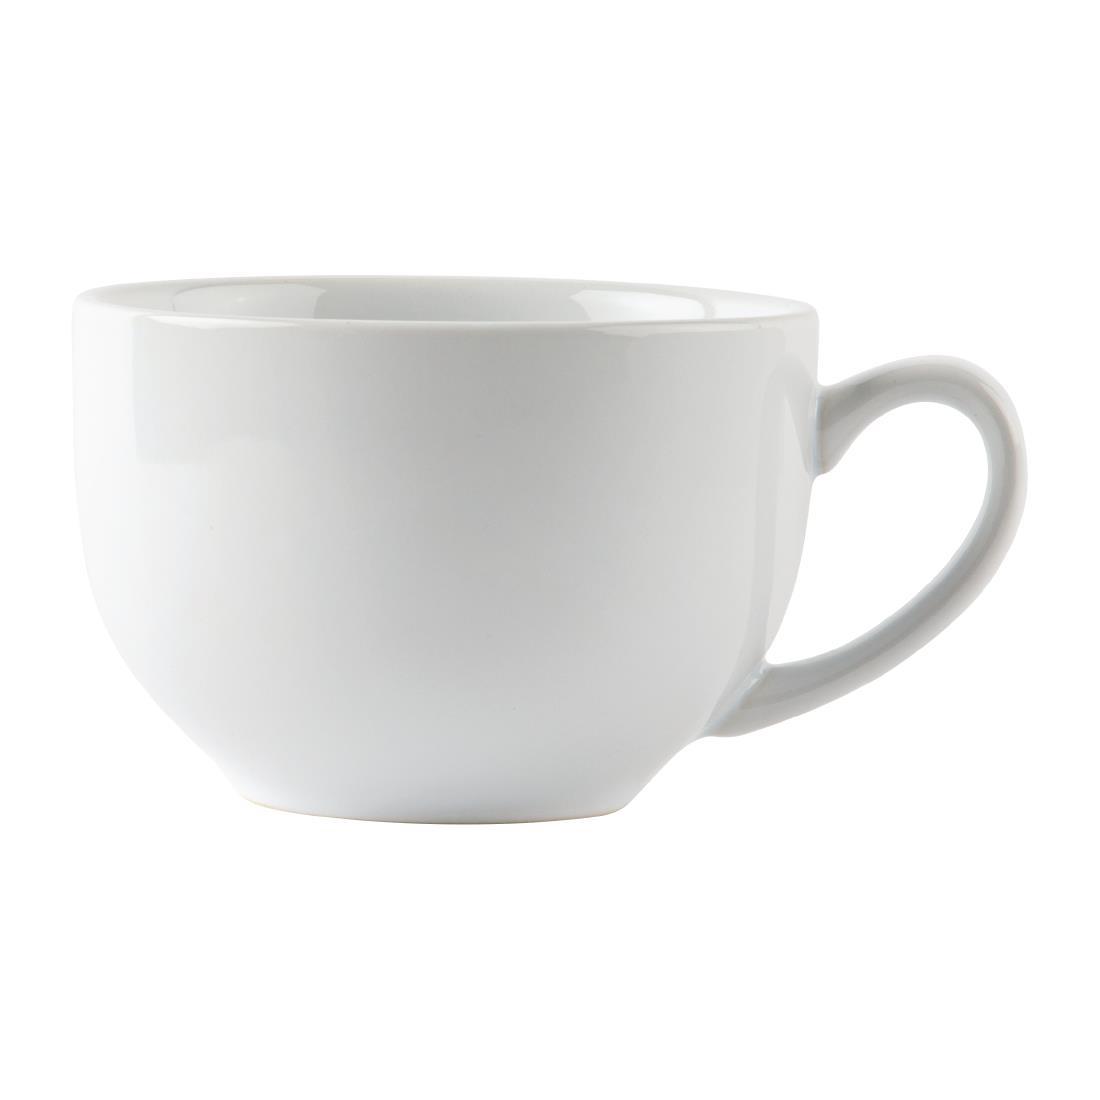 Olympia Cafe Cappuccino Cups White 340ml (Pack of 12) - GK077  - 4